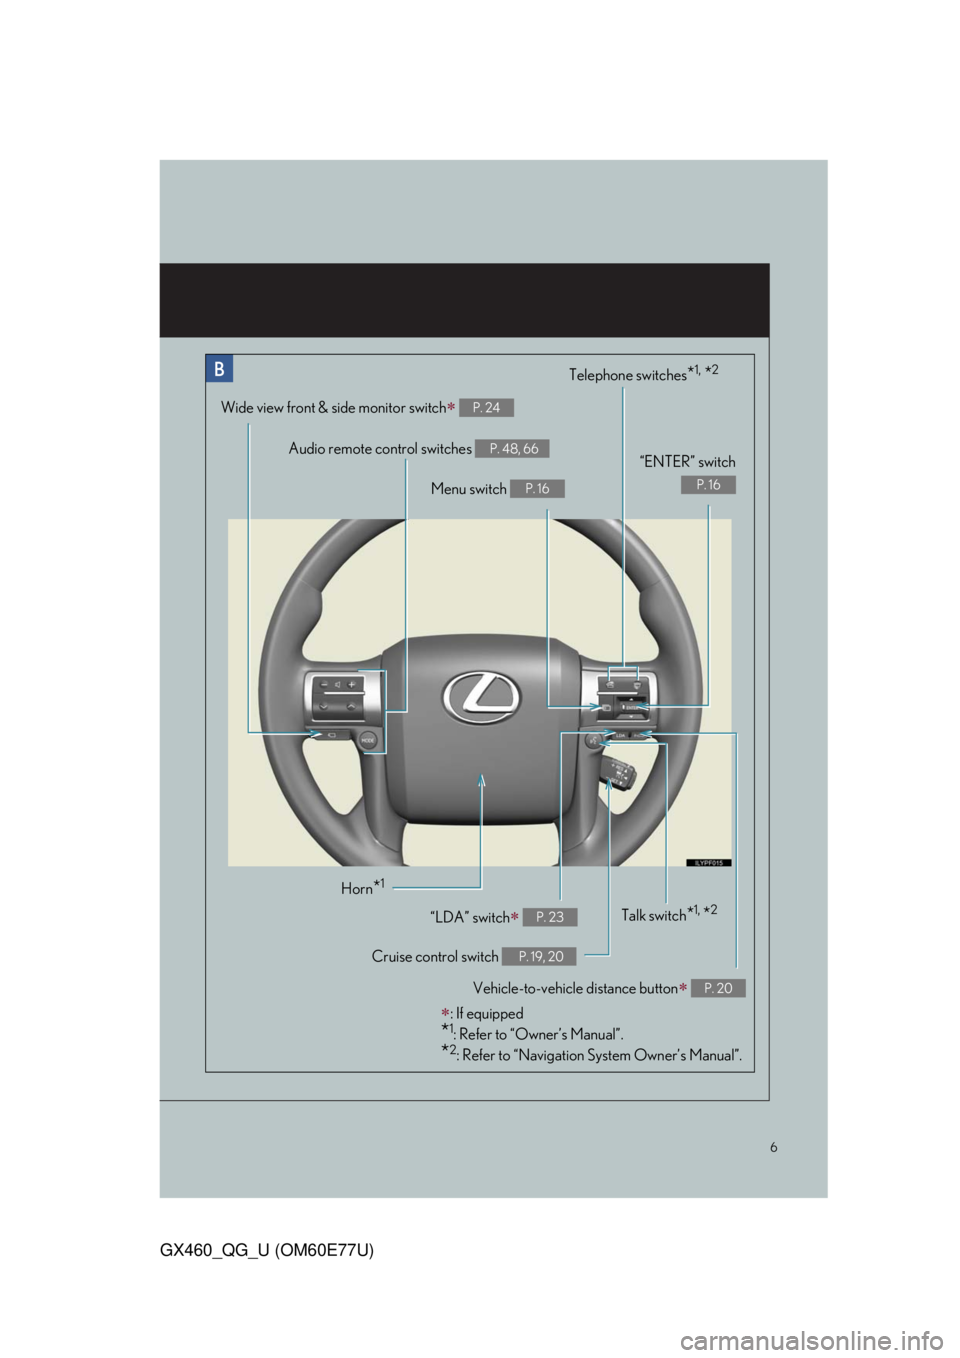 Lexus GX460 2010  Scheduled Maintenance Guide / 6
GX460_QG_U (OM60E77U)
Audio remote control switches P. 48, 66
Telephone switches*1, *2
Menu switch P. 16
“ENTER” switch
P. 16
Wide view front & side monitor switch P. 24
Horn*1
Talk switch*1,